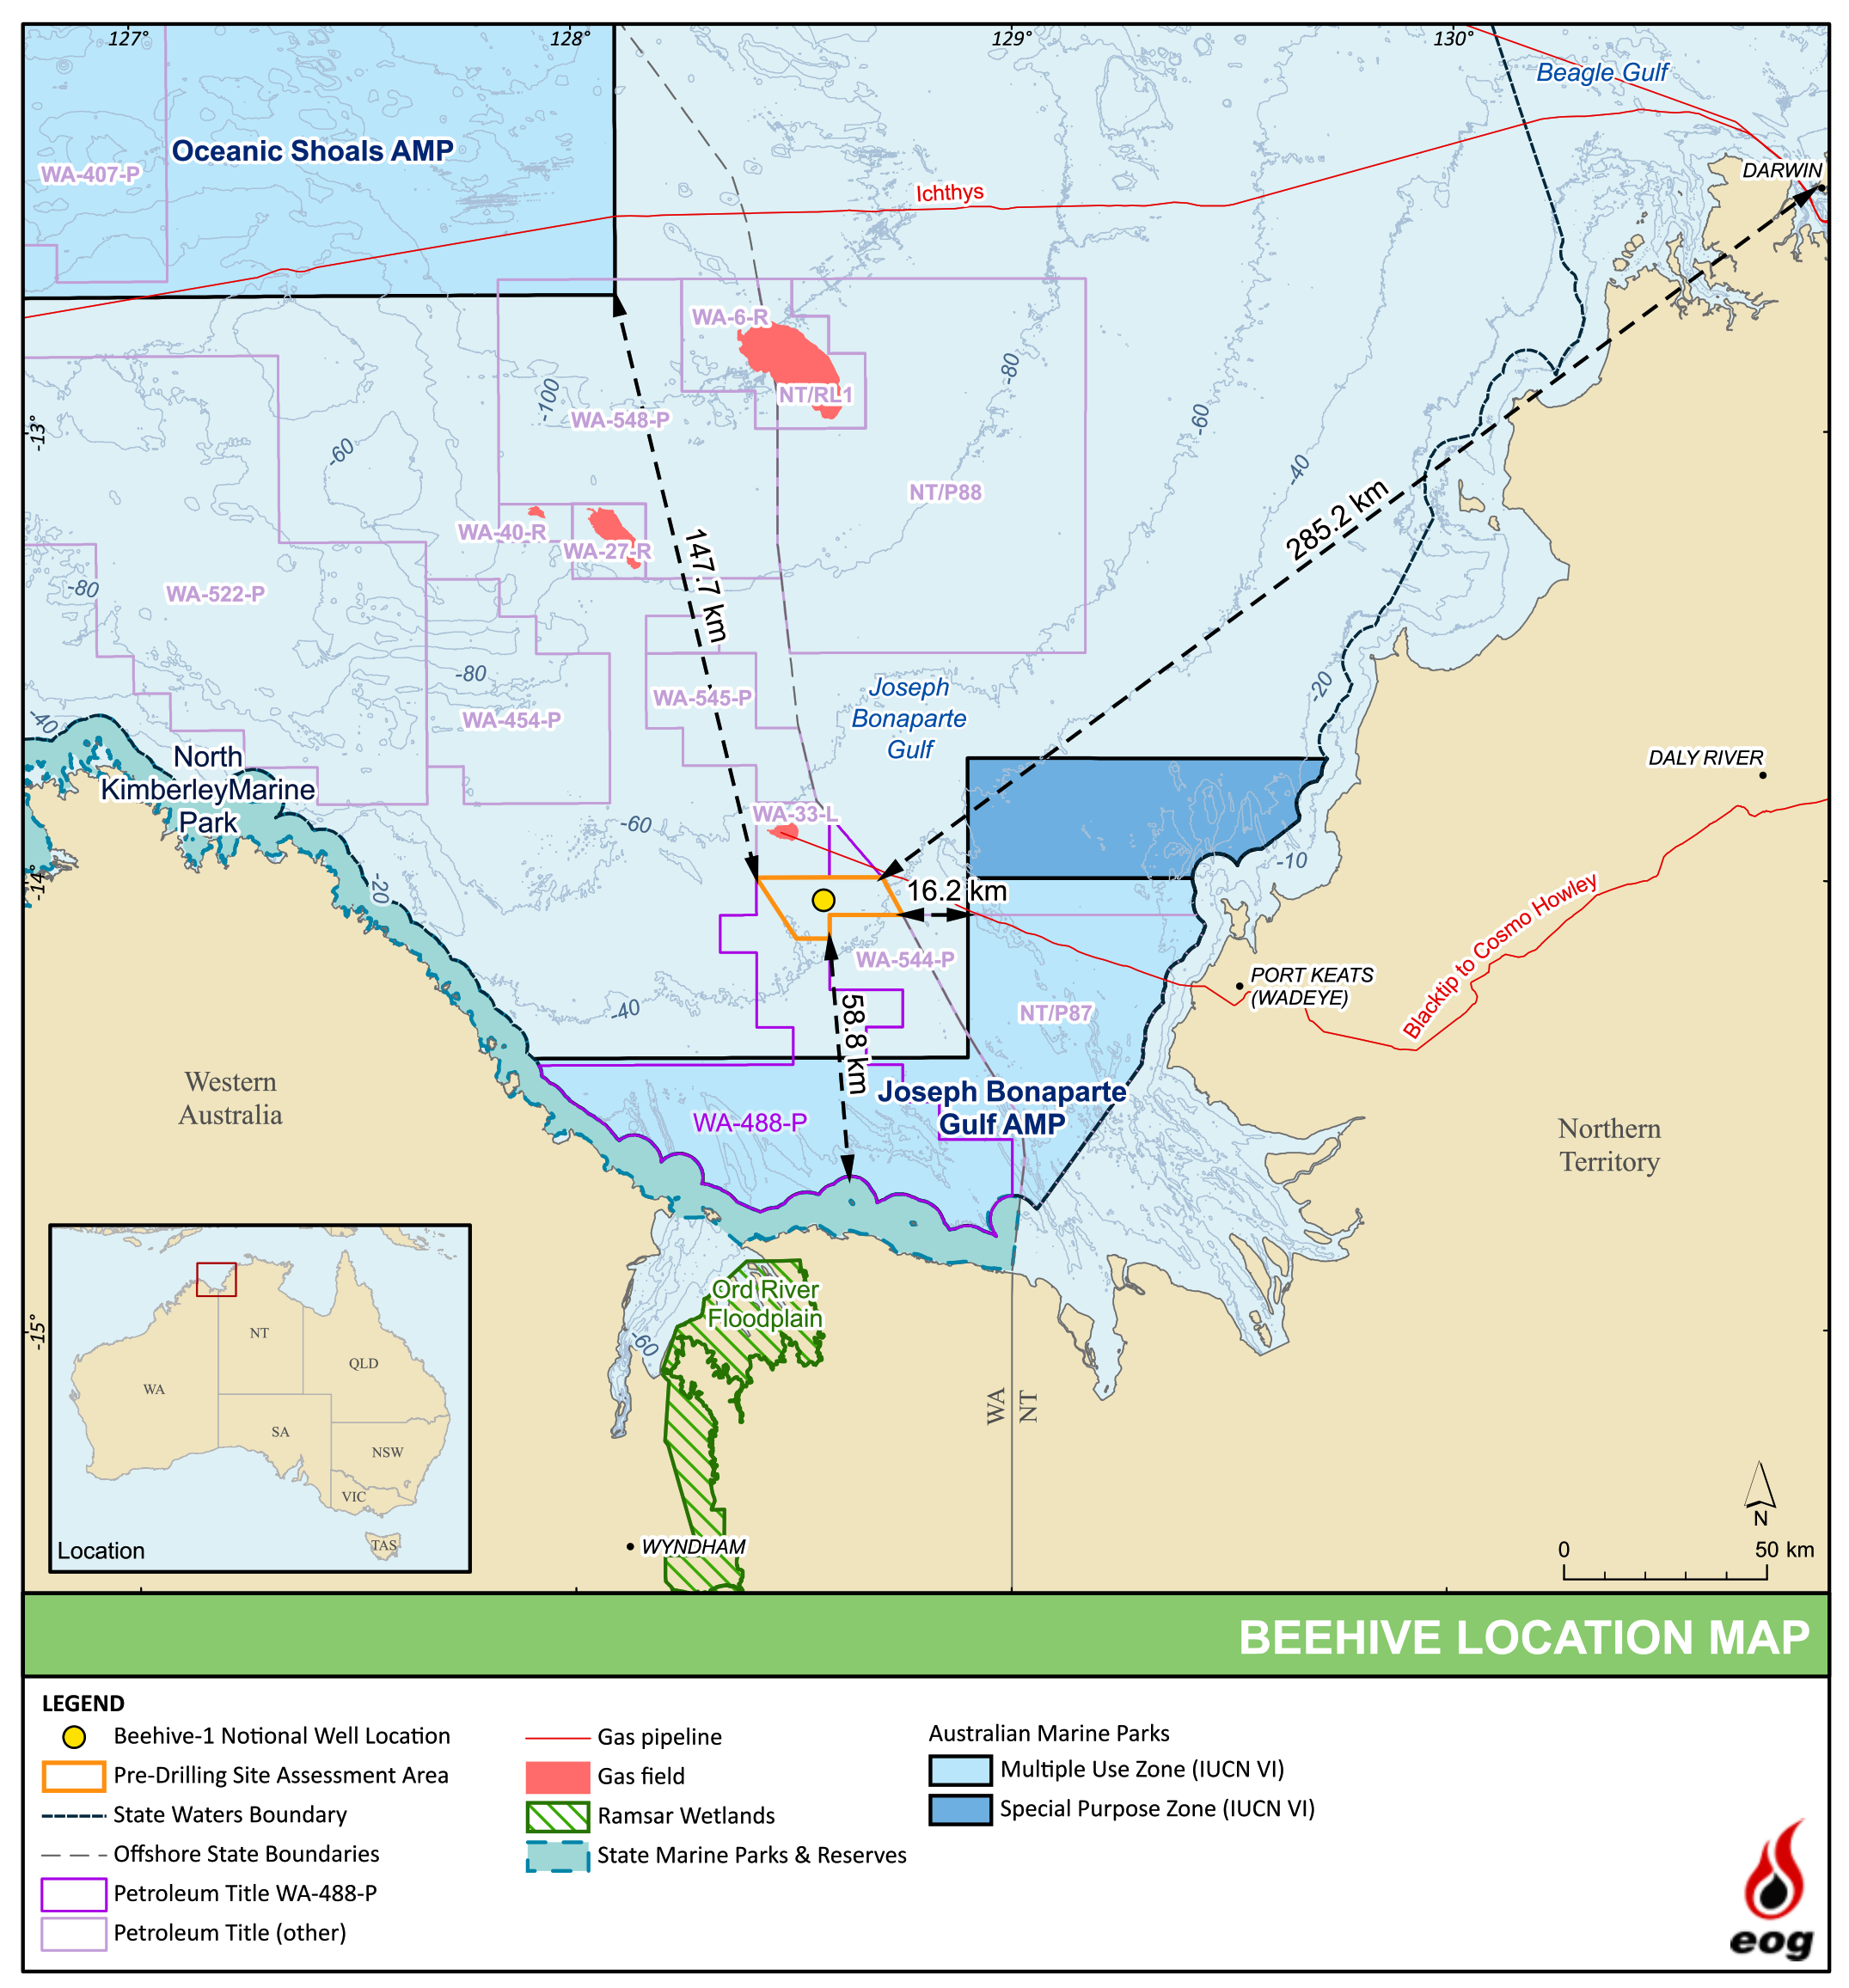 Location map - Activity: Beehive Pre-Drill Seabed Assessment (refer to description)